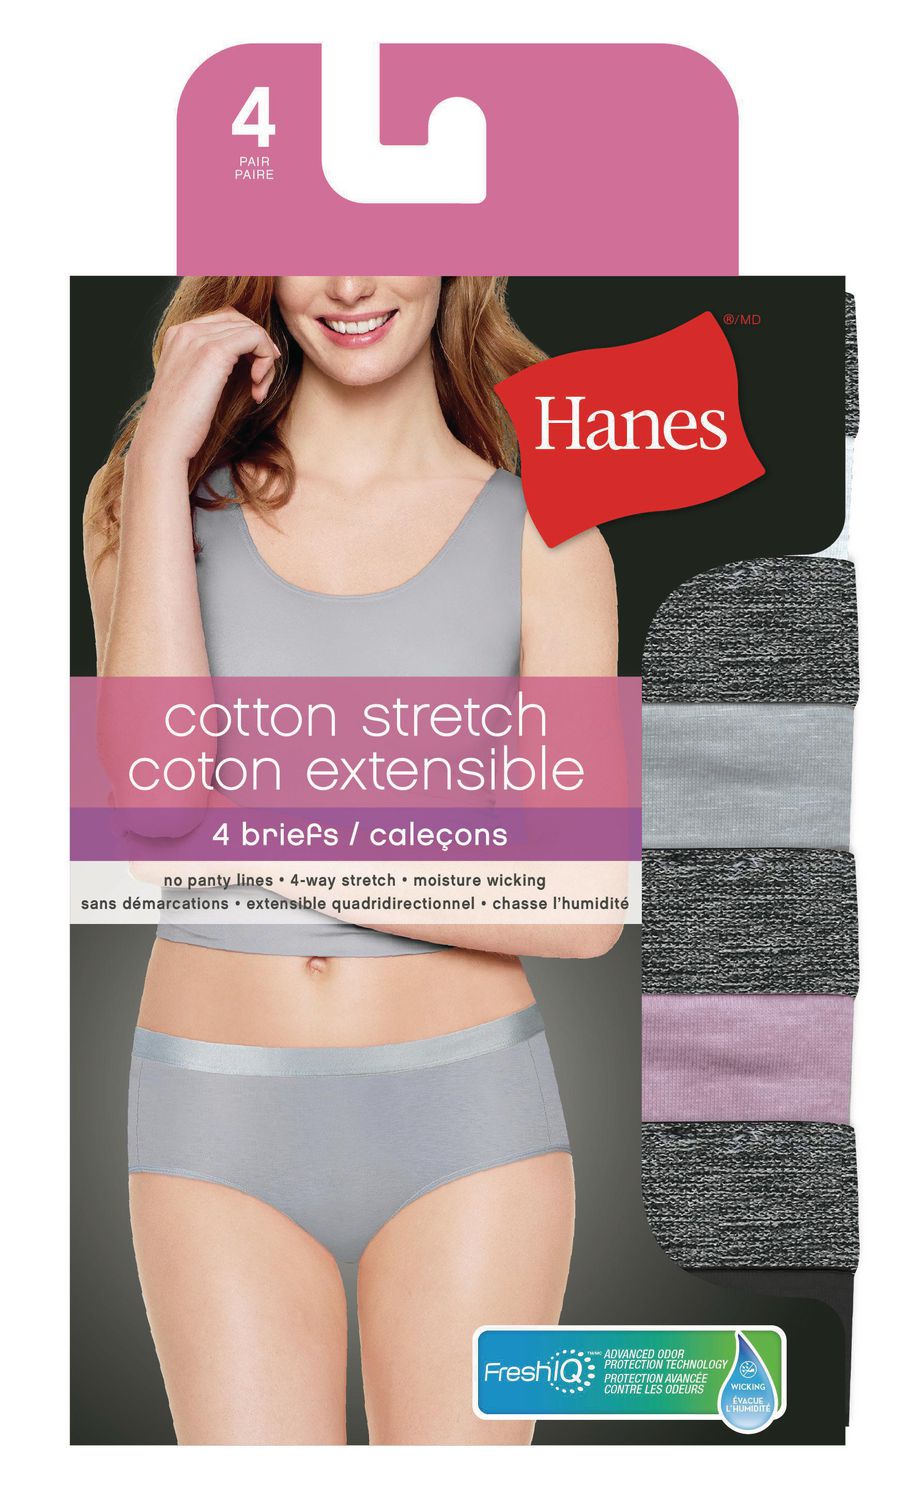 Hanes Women’s Size 7 Large Panties Black Briefs Stretch Textured Fabric